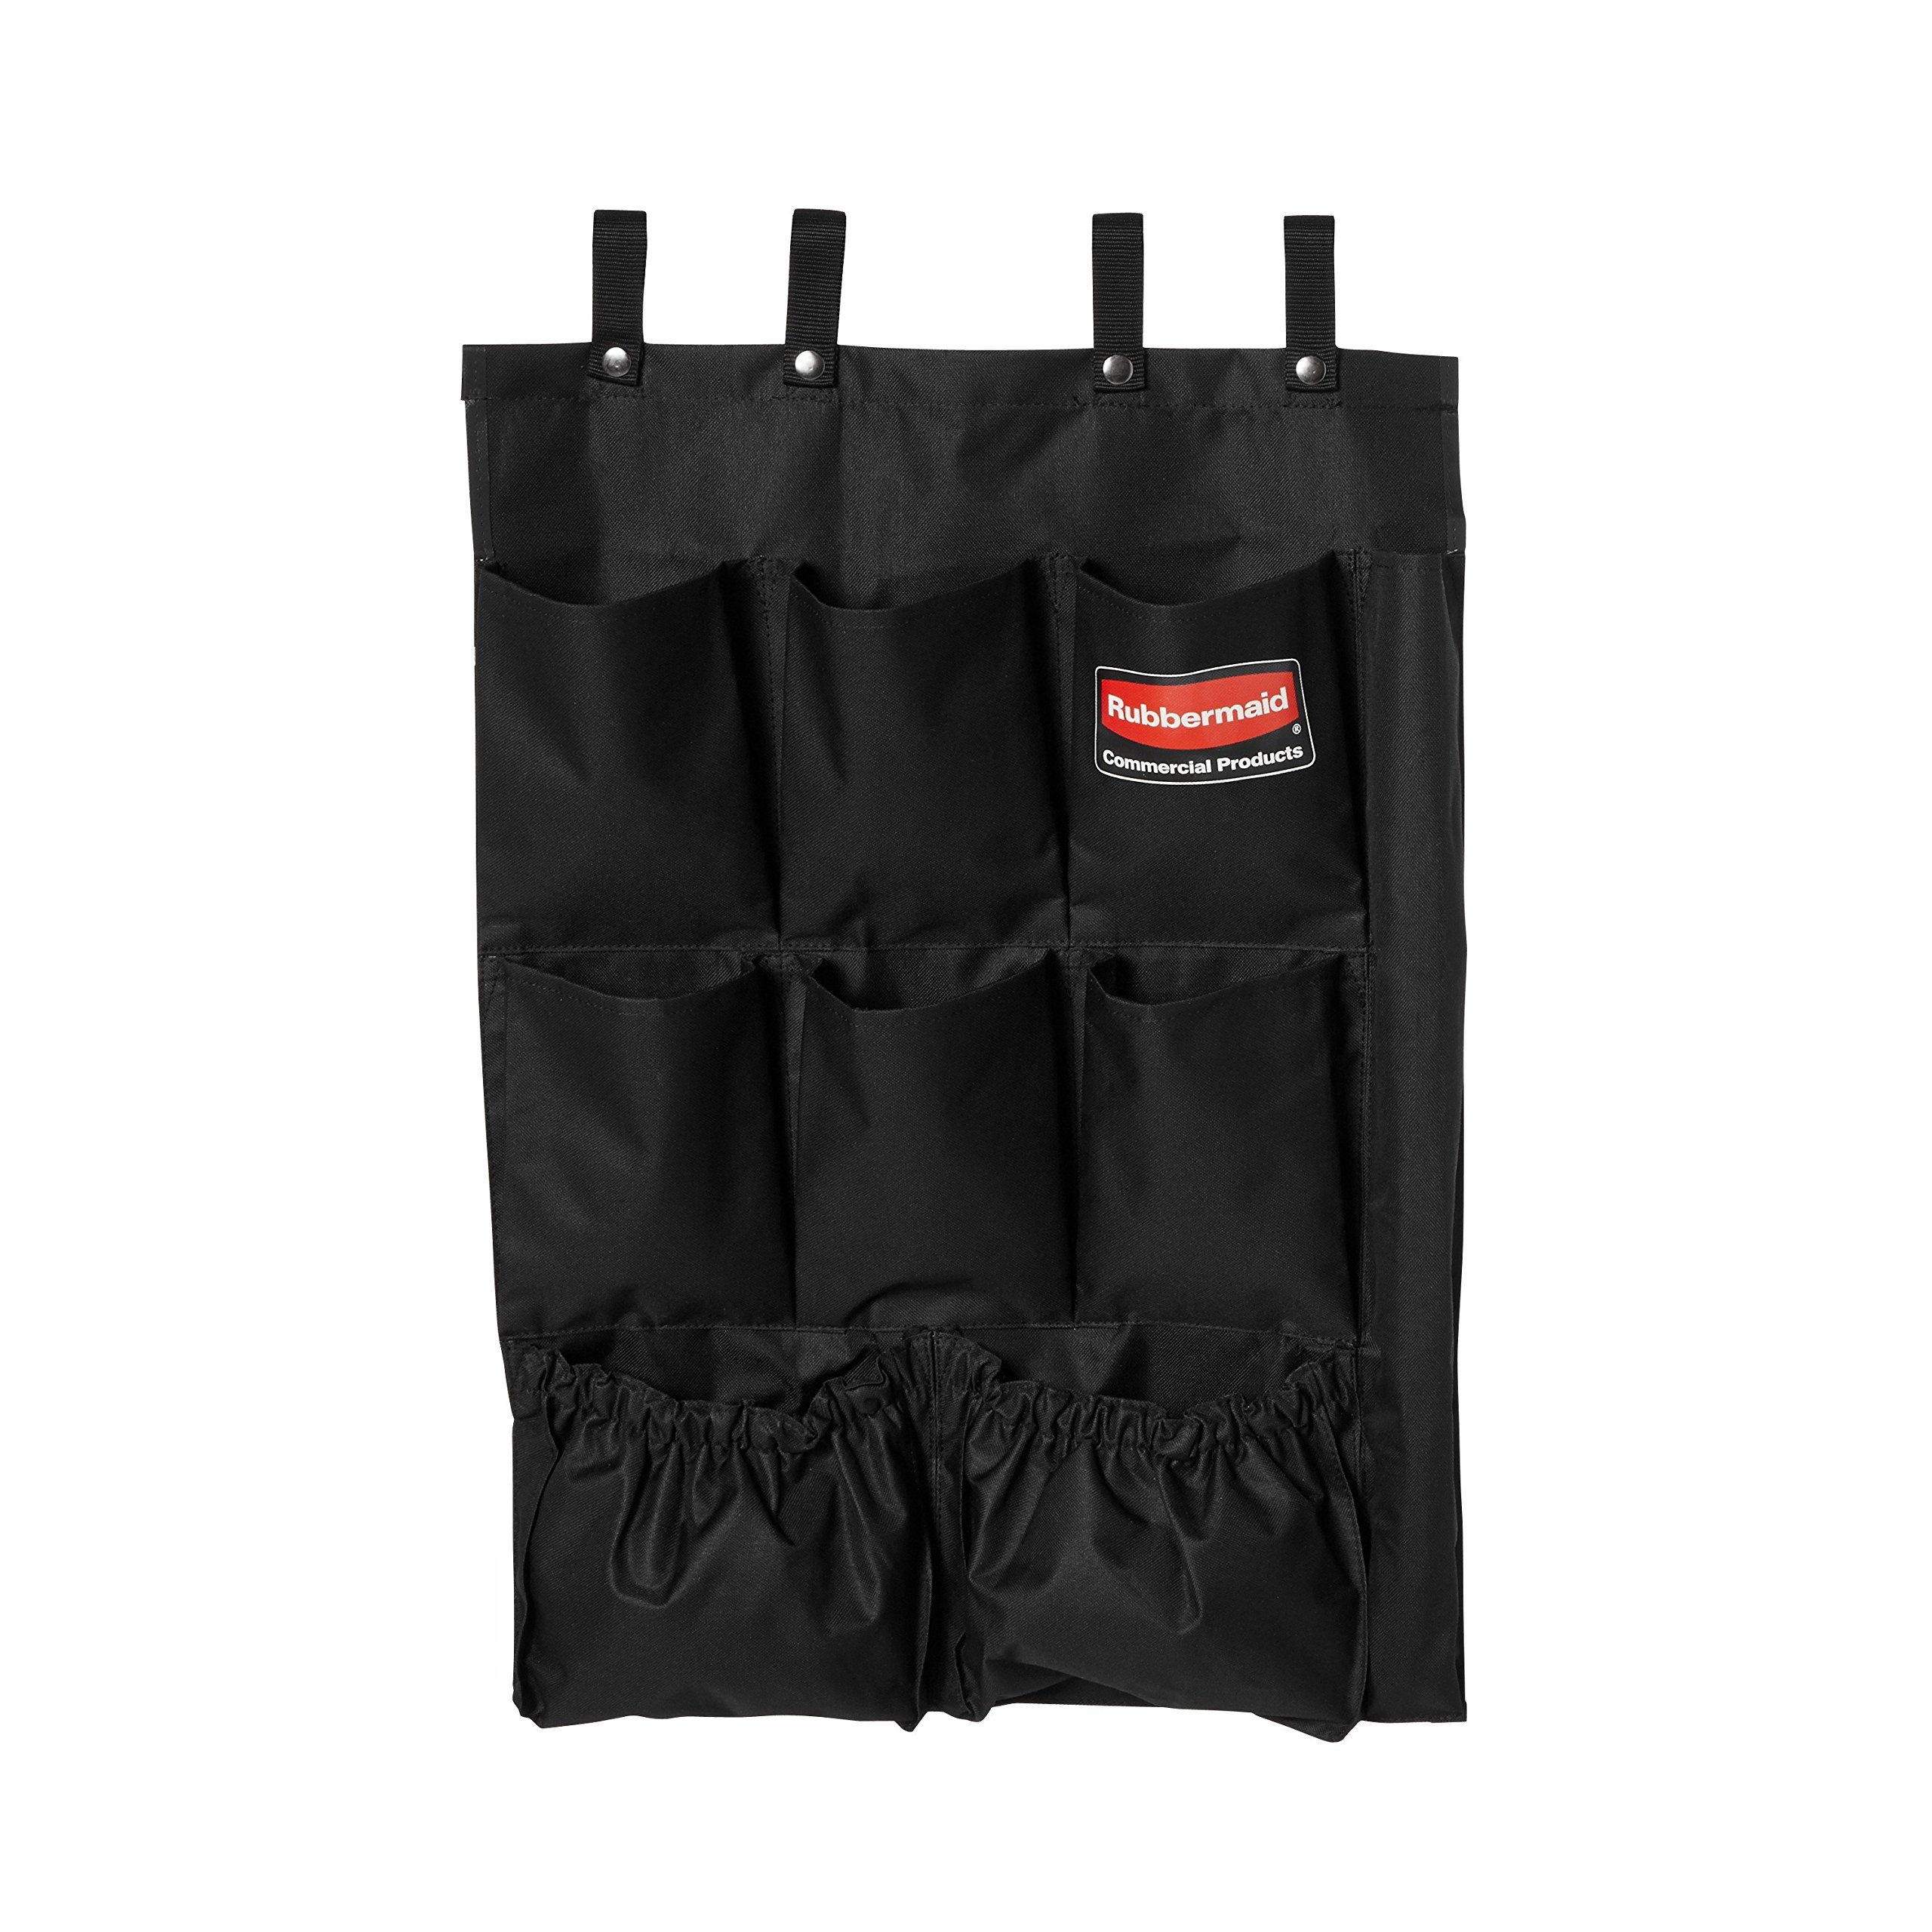 Rubbermaid Commercial Products 9 Pocket Fabric Organizer (Only) - Black